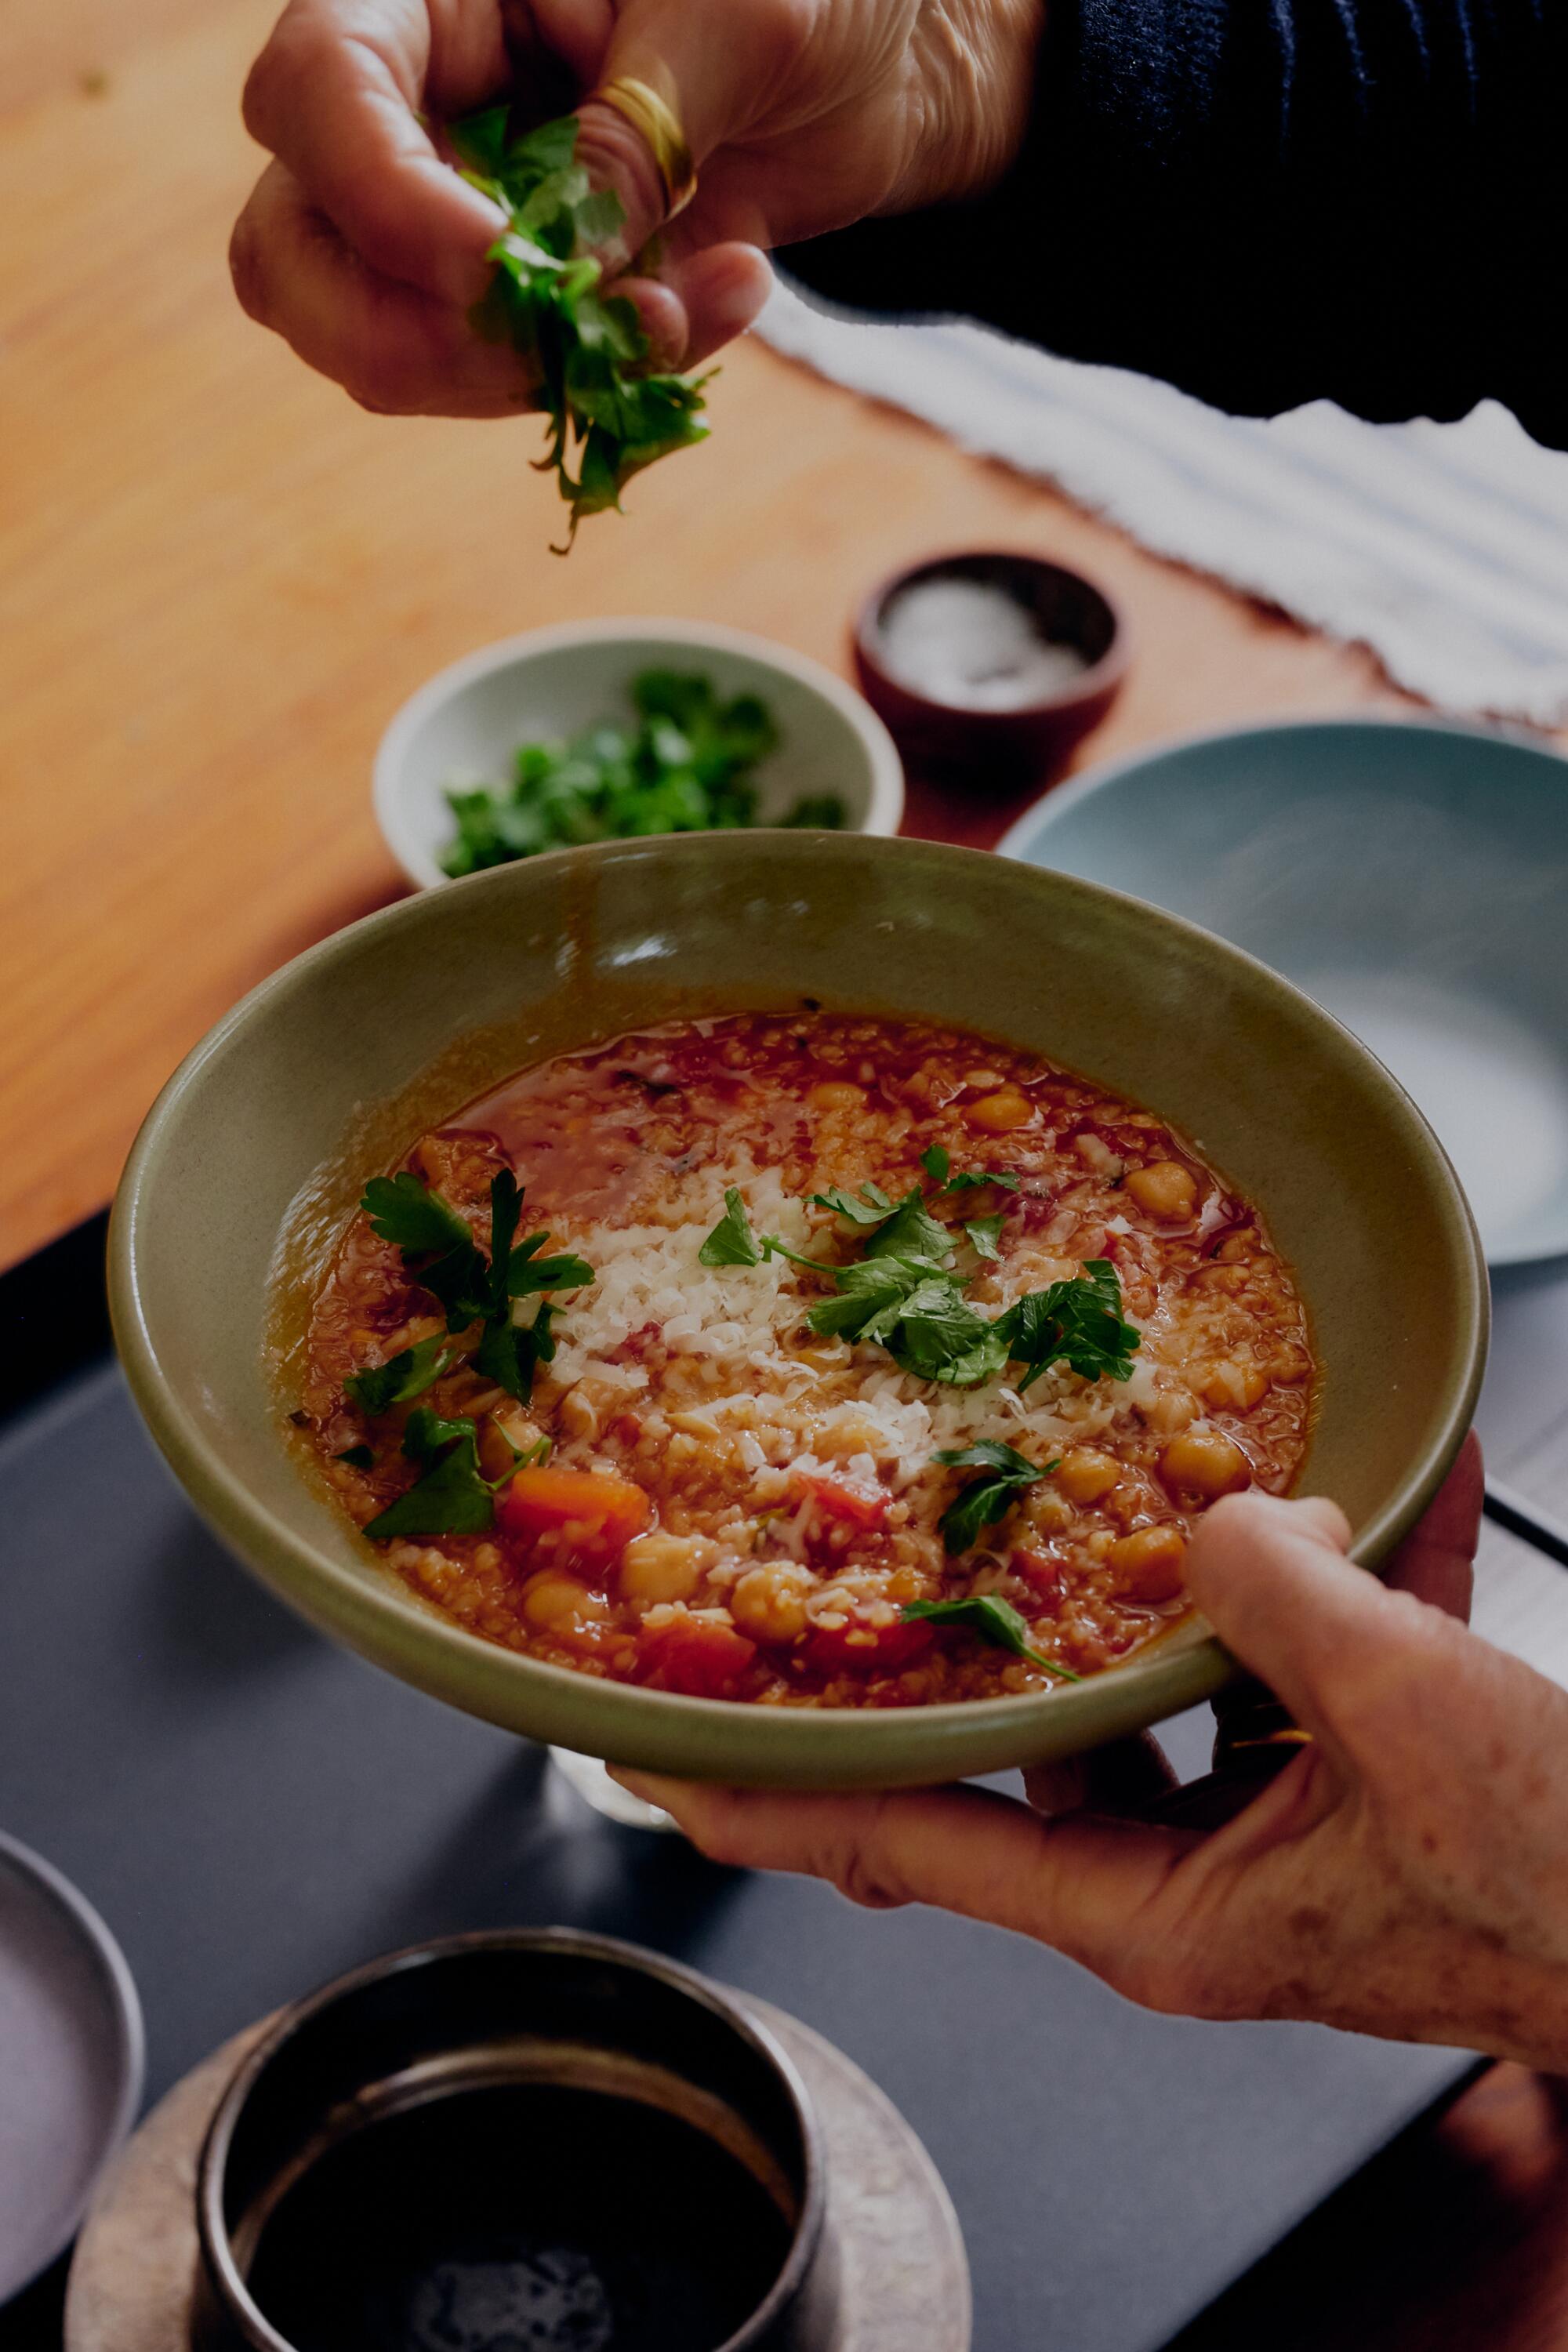 Hands garnishing a bowl of Roman-style Chickpea and Tomato Soup With Bulgur